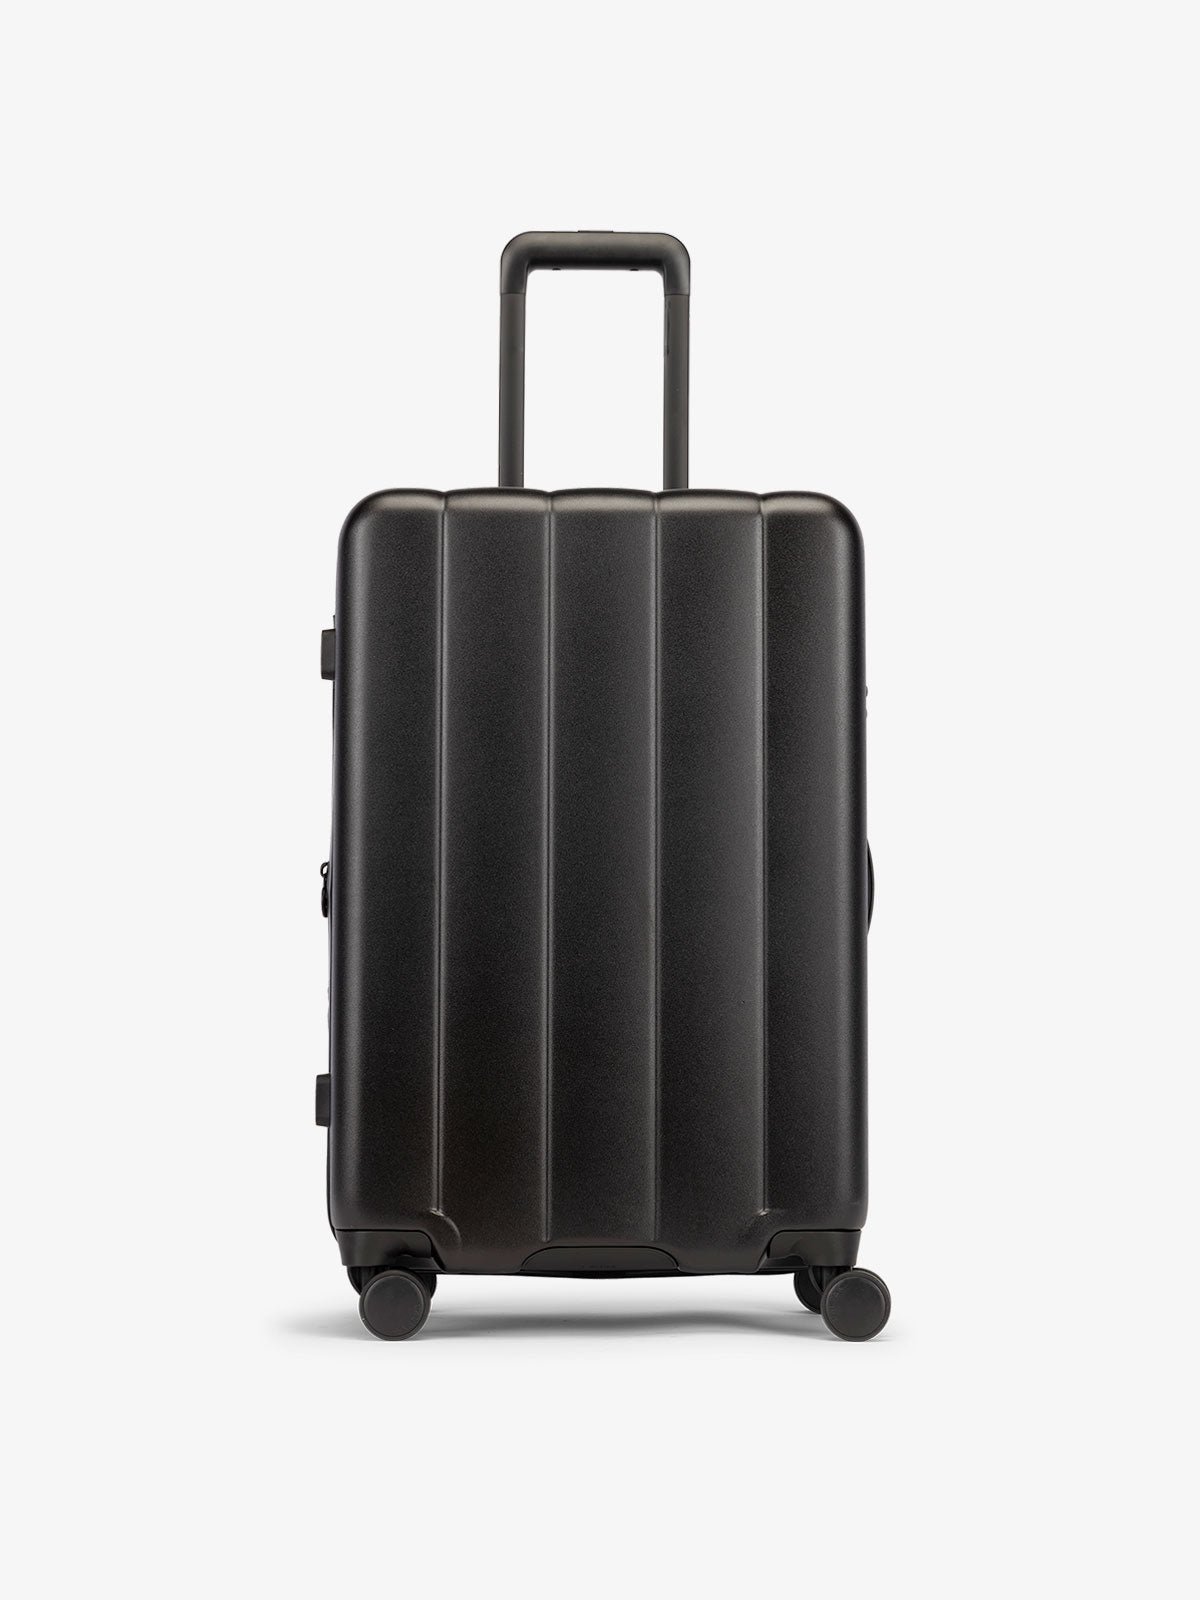 Black medium luggage made from an ultra-durable polycarbonate shell and expandable by up to 2"